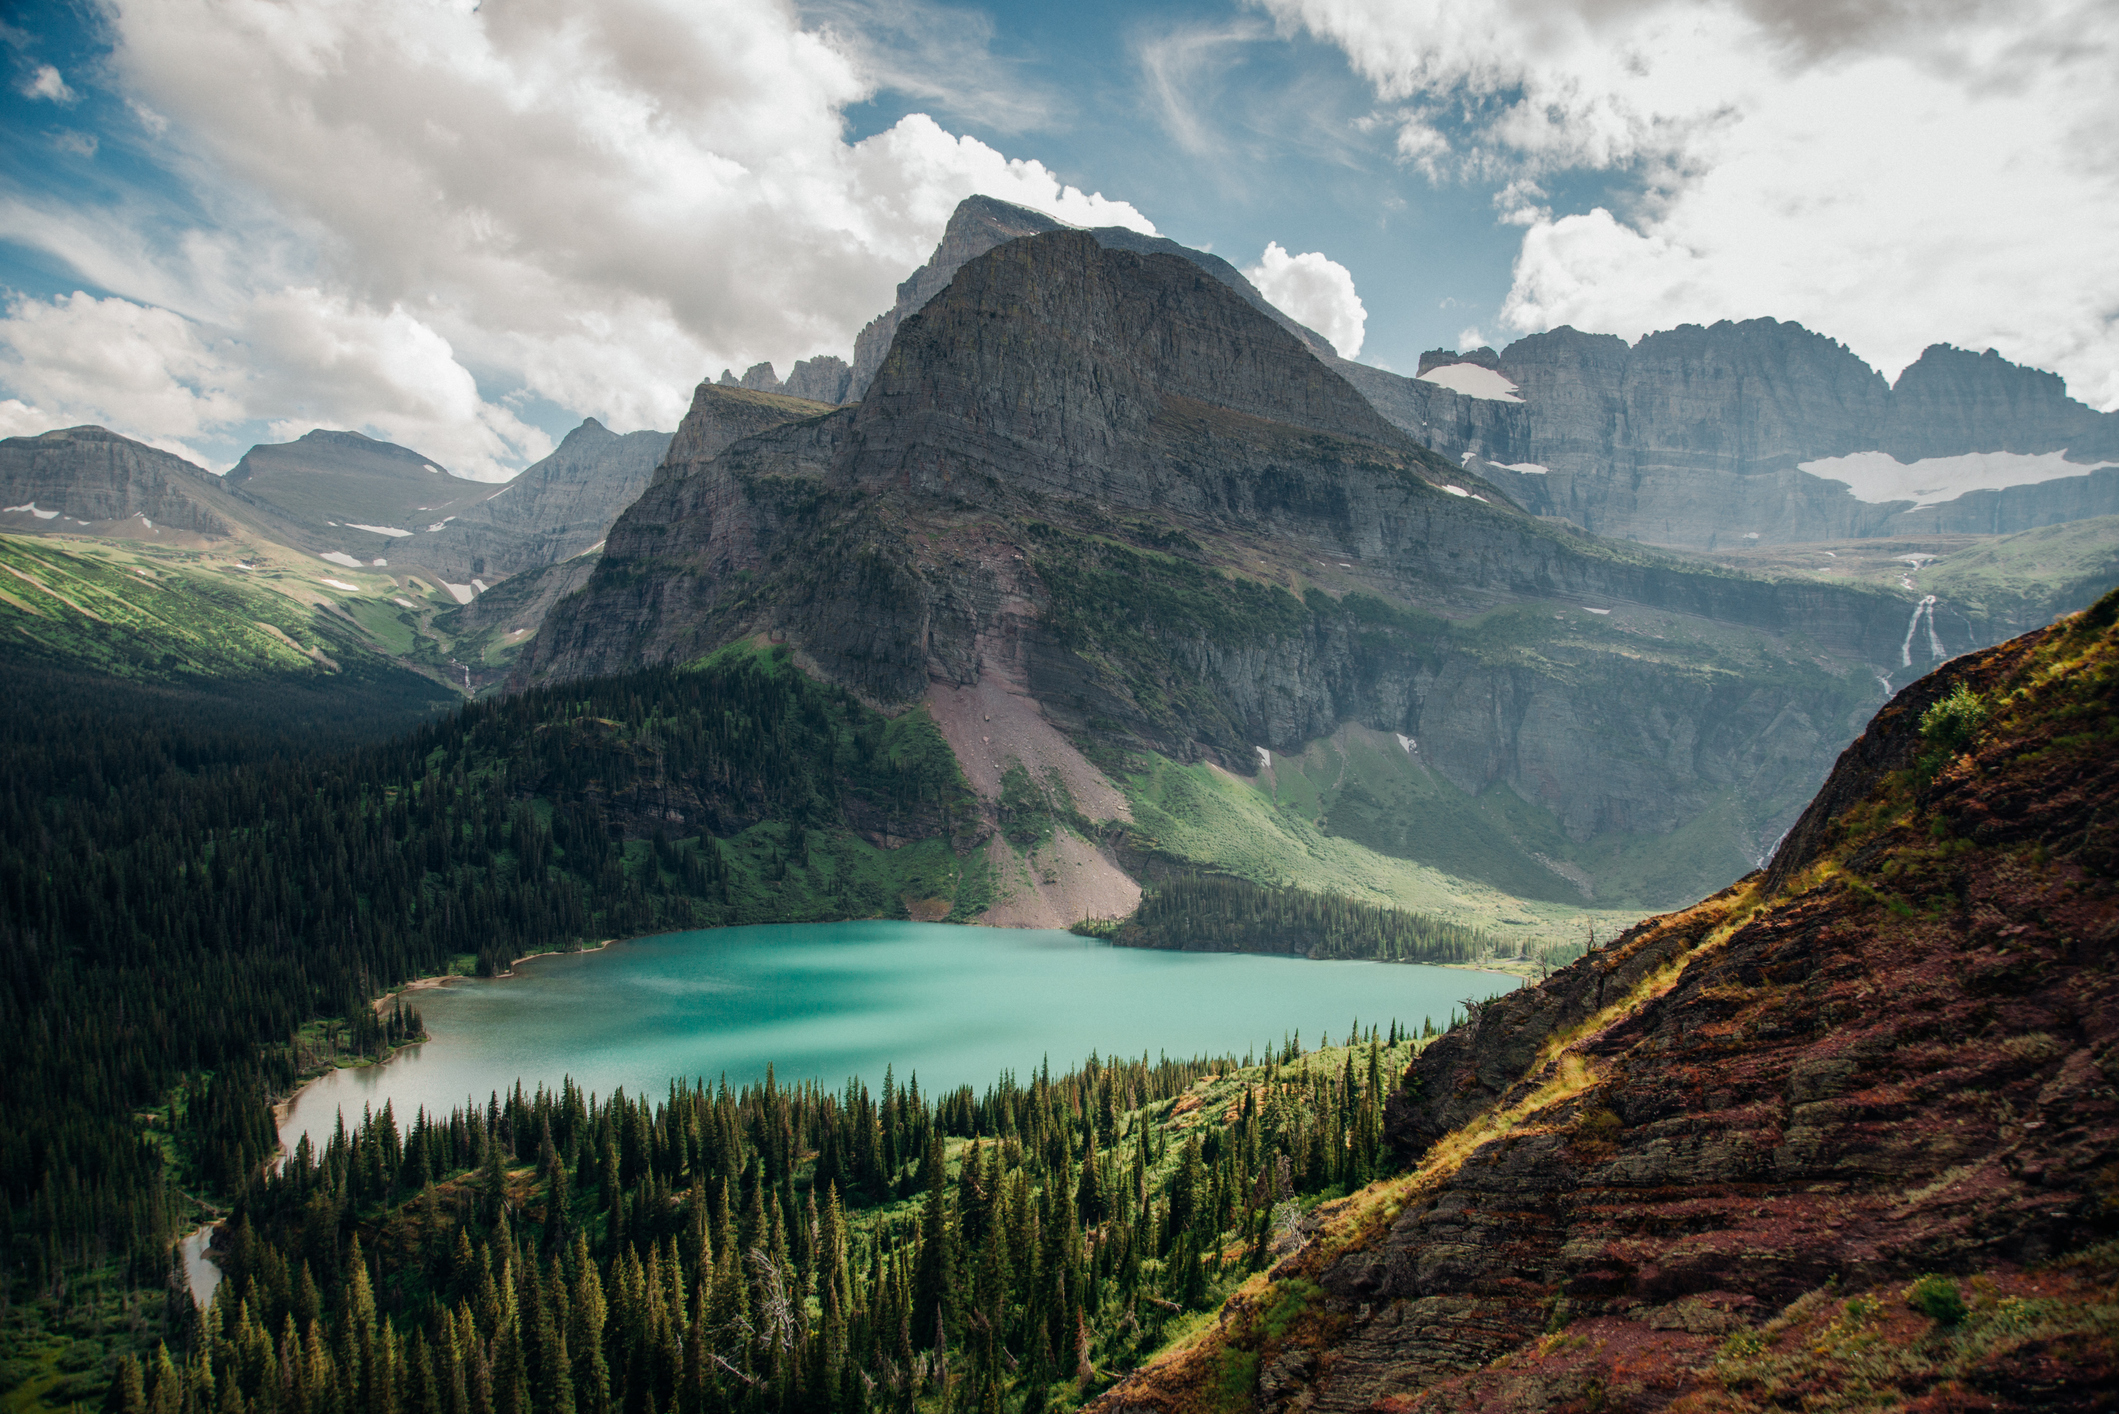 Glacier National Park is remote and beautiful, but still very popular.